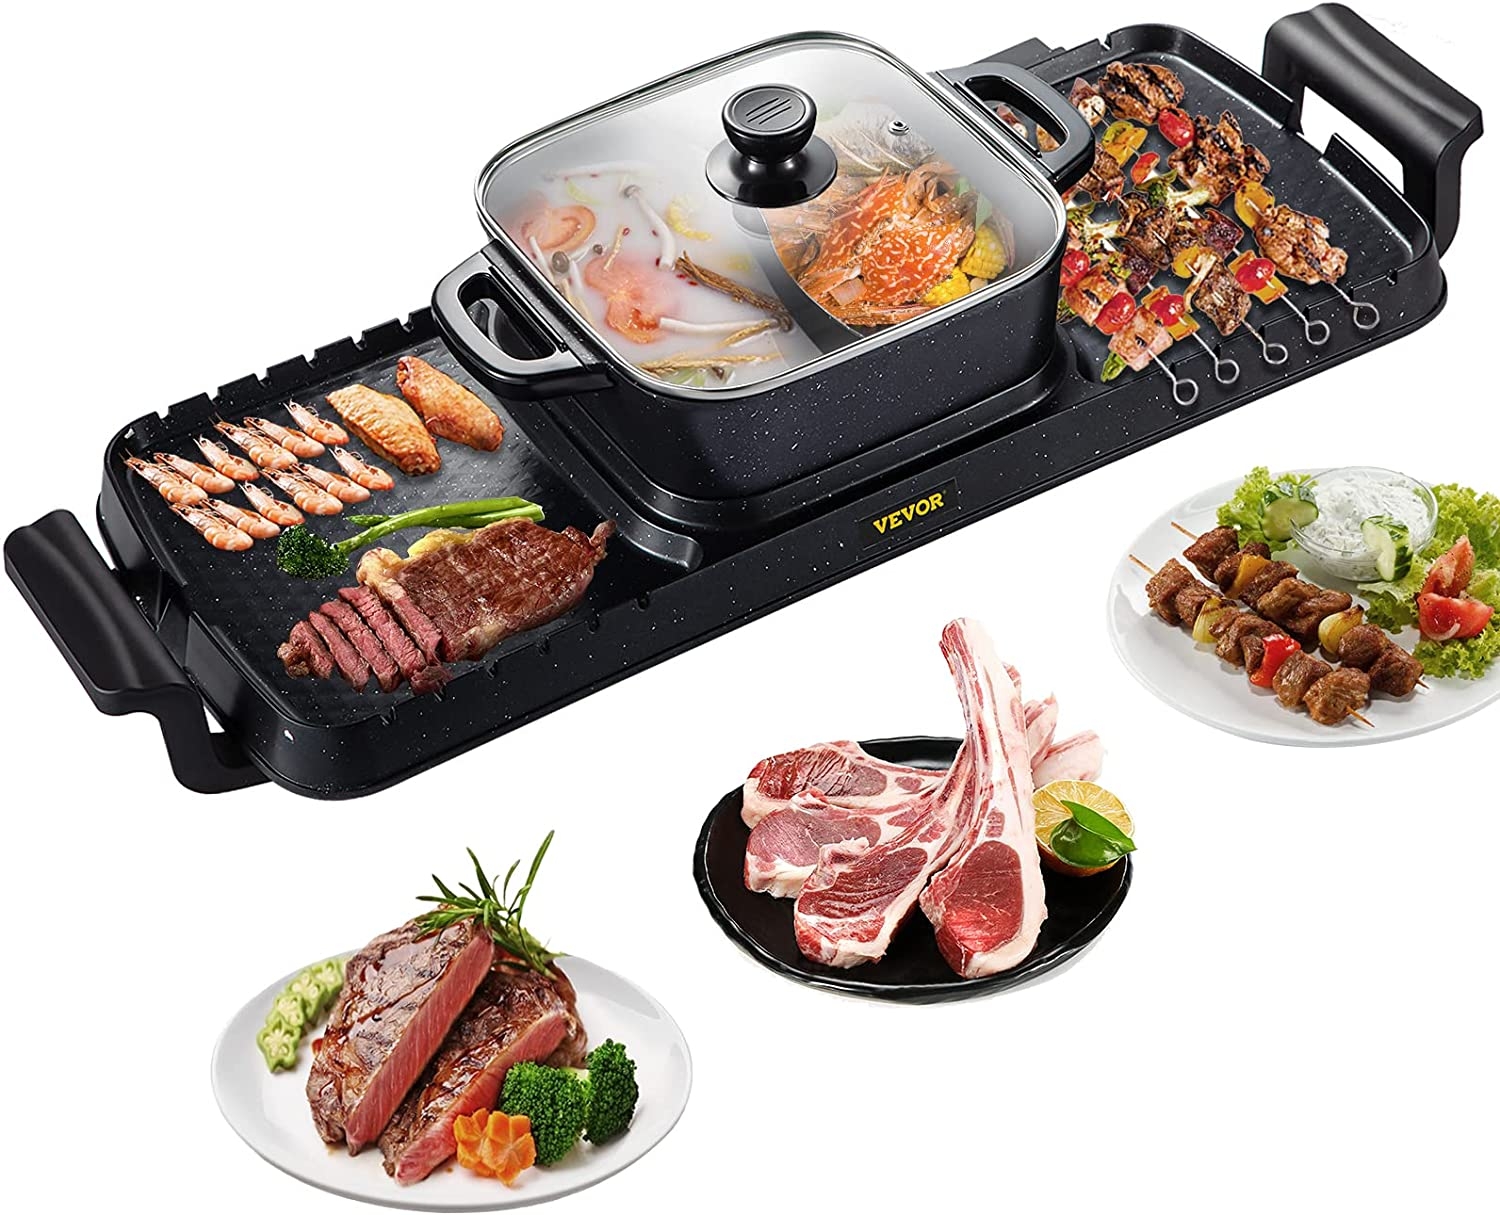 VEVOR 2 in 1 Electric Grill and Hot Pot, 2200W BBQ Pan Grill and Hot Pot, Multifunctional Teppanyaki Grill Pot with Dual Temp